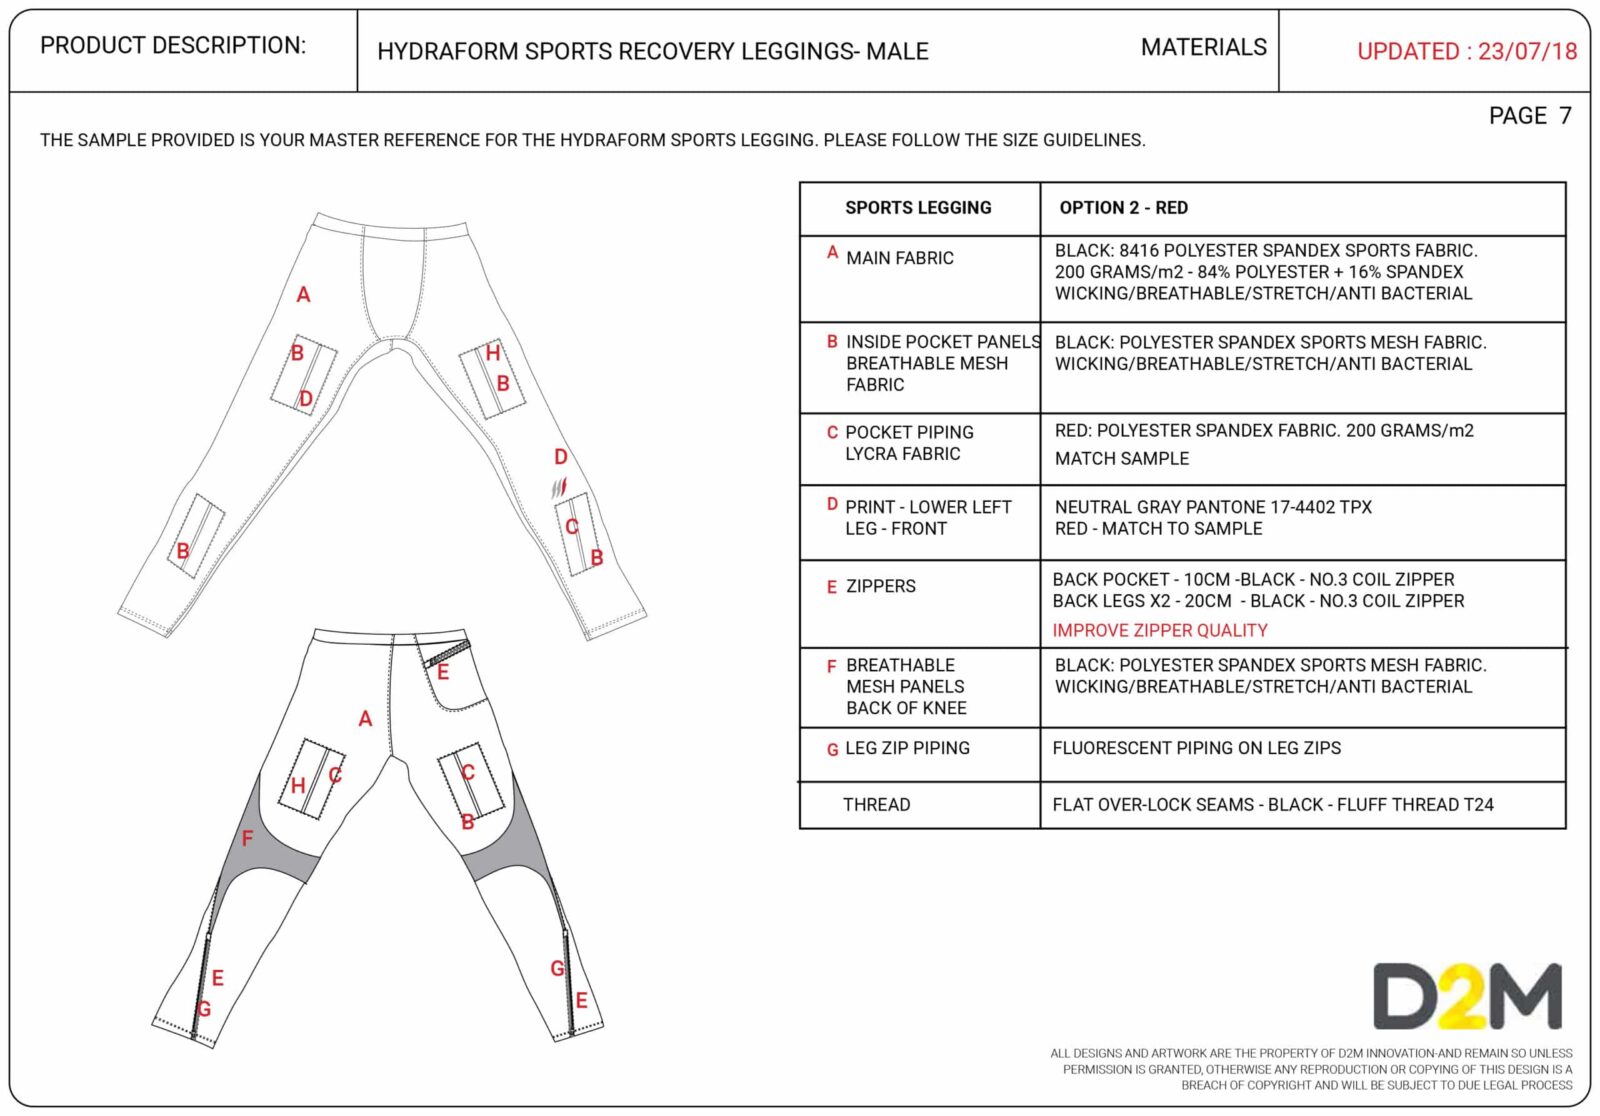 Manufacturing specification for male leggings